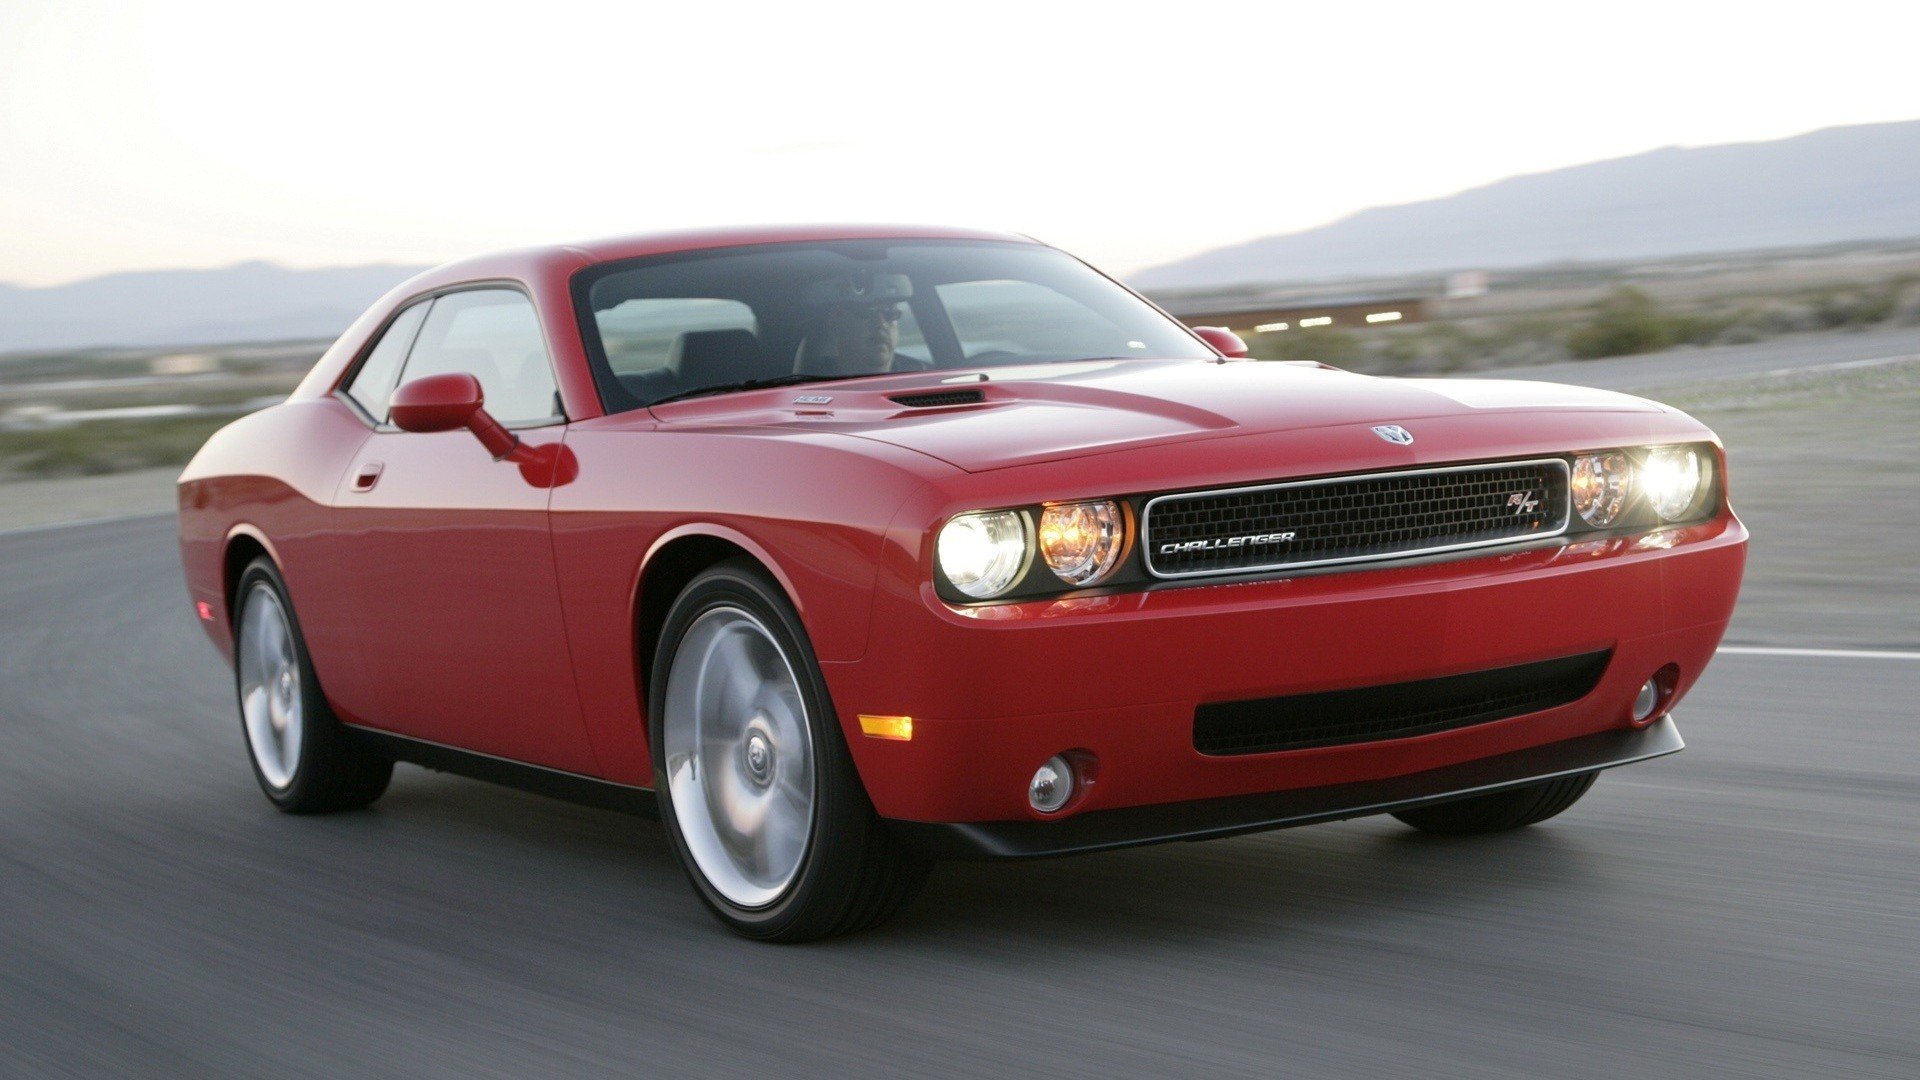 cars, Red, Cars, Dodge, Challenger, R t, Auto Wallpaper